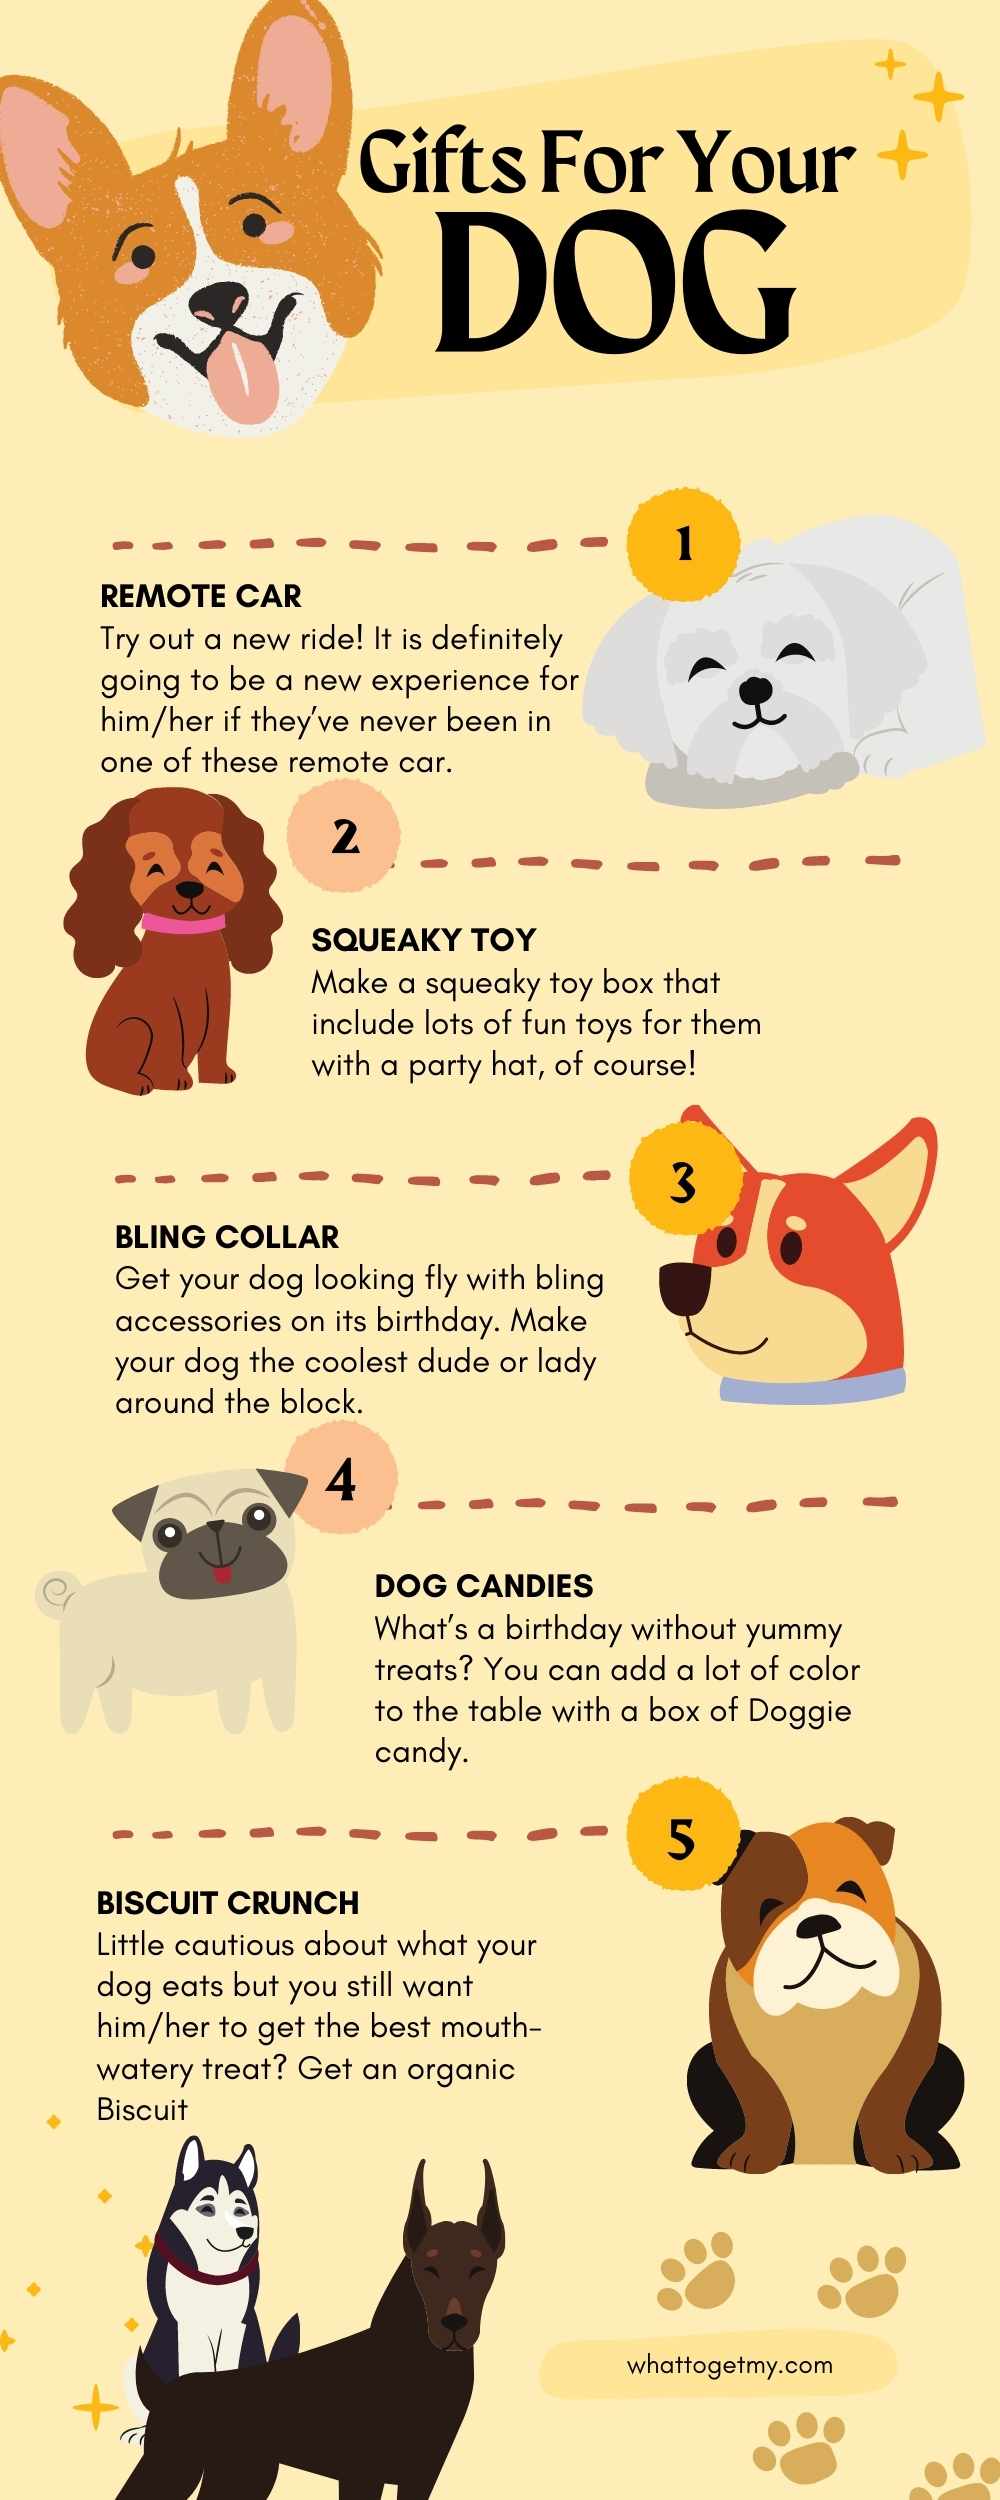 Gifts For Your Dog